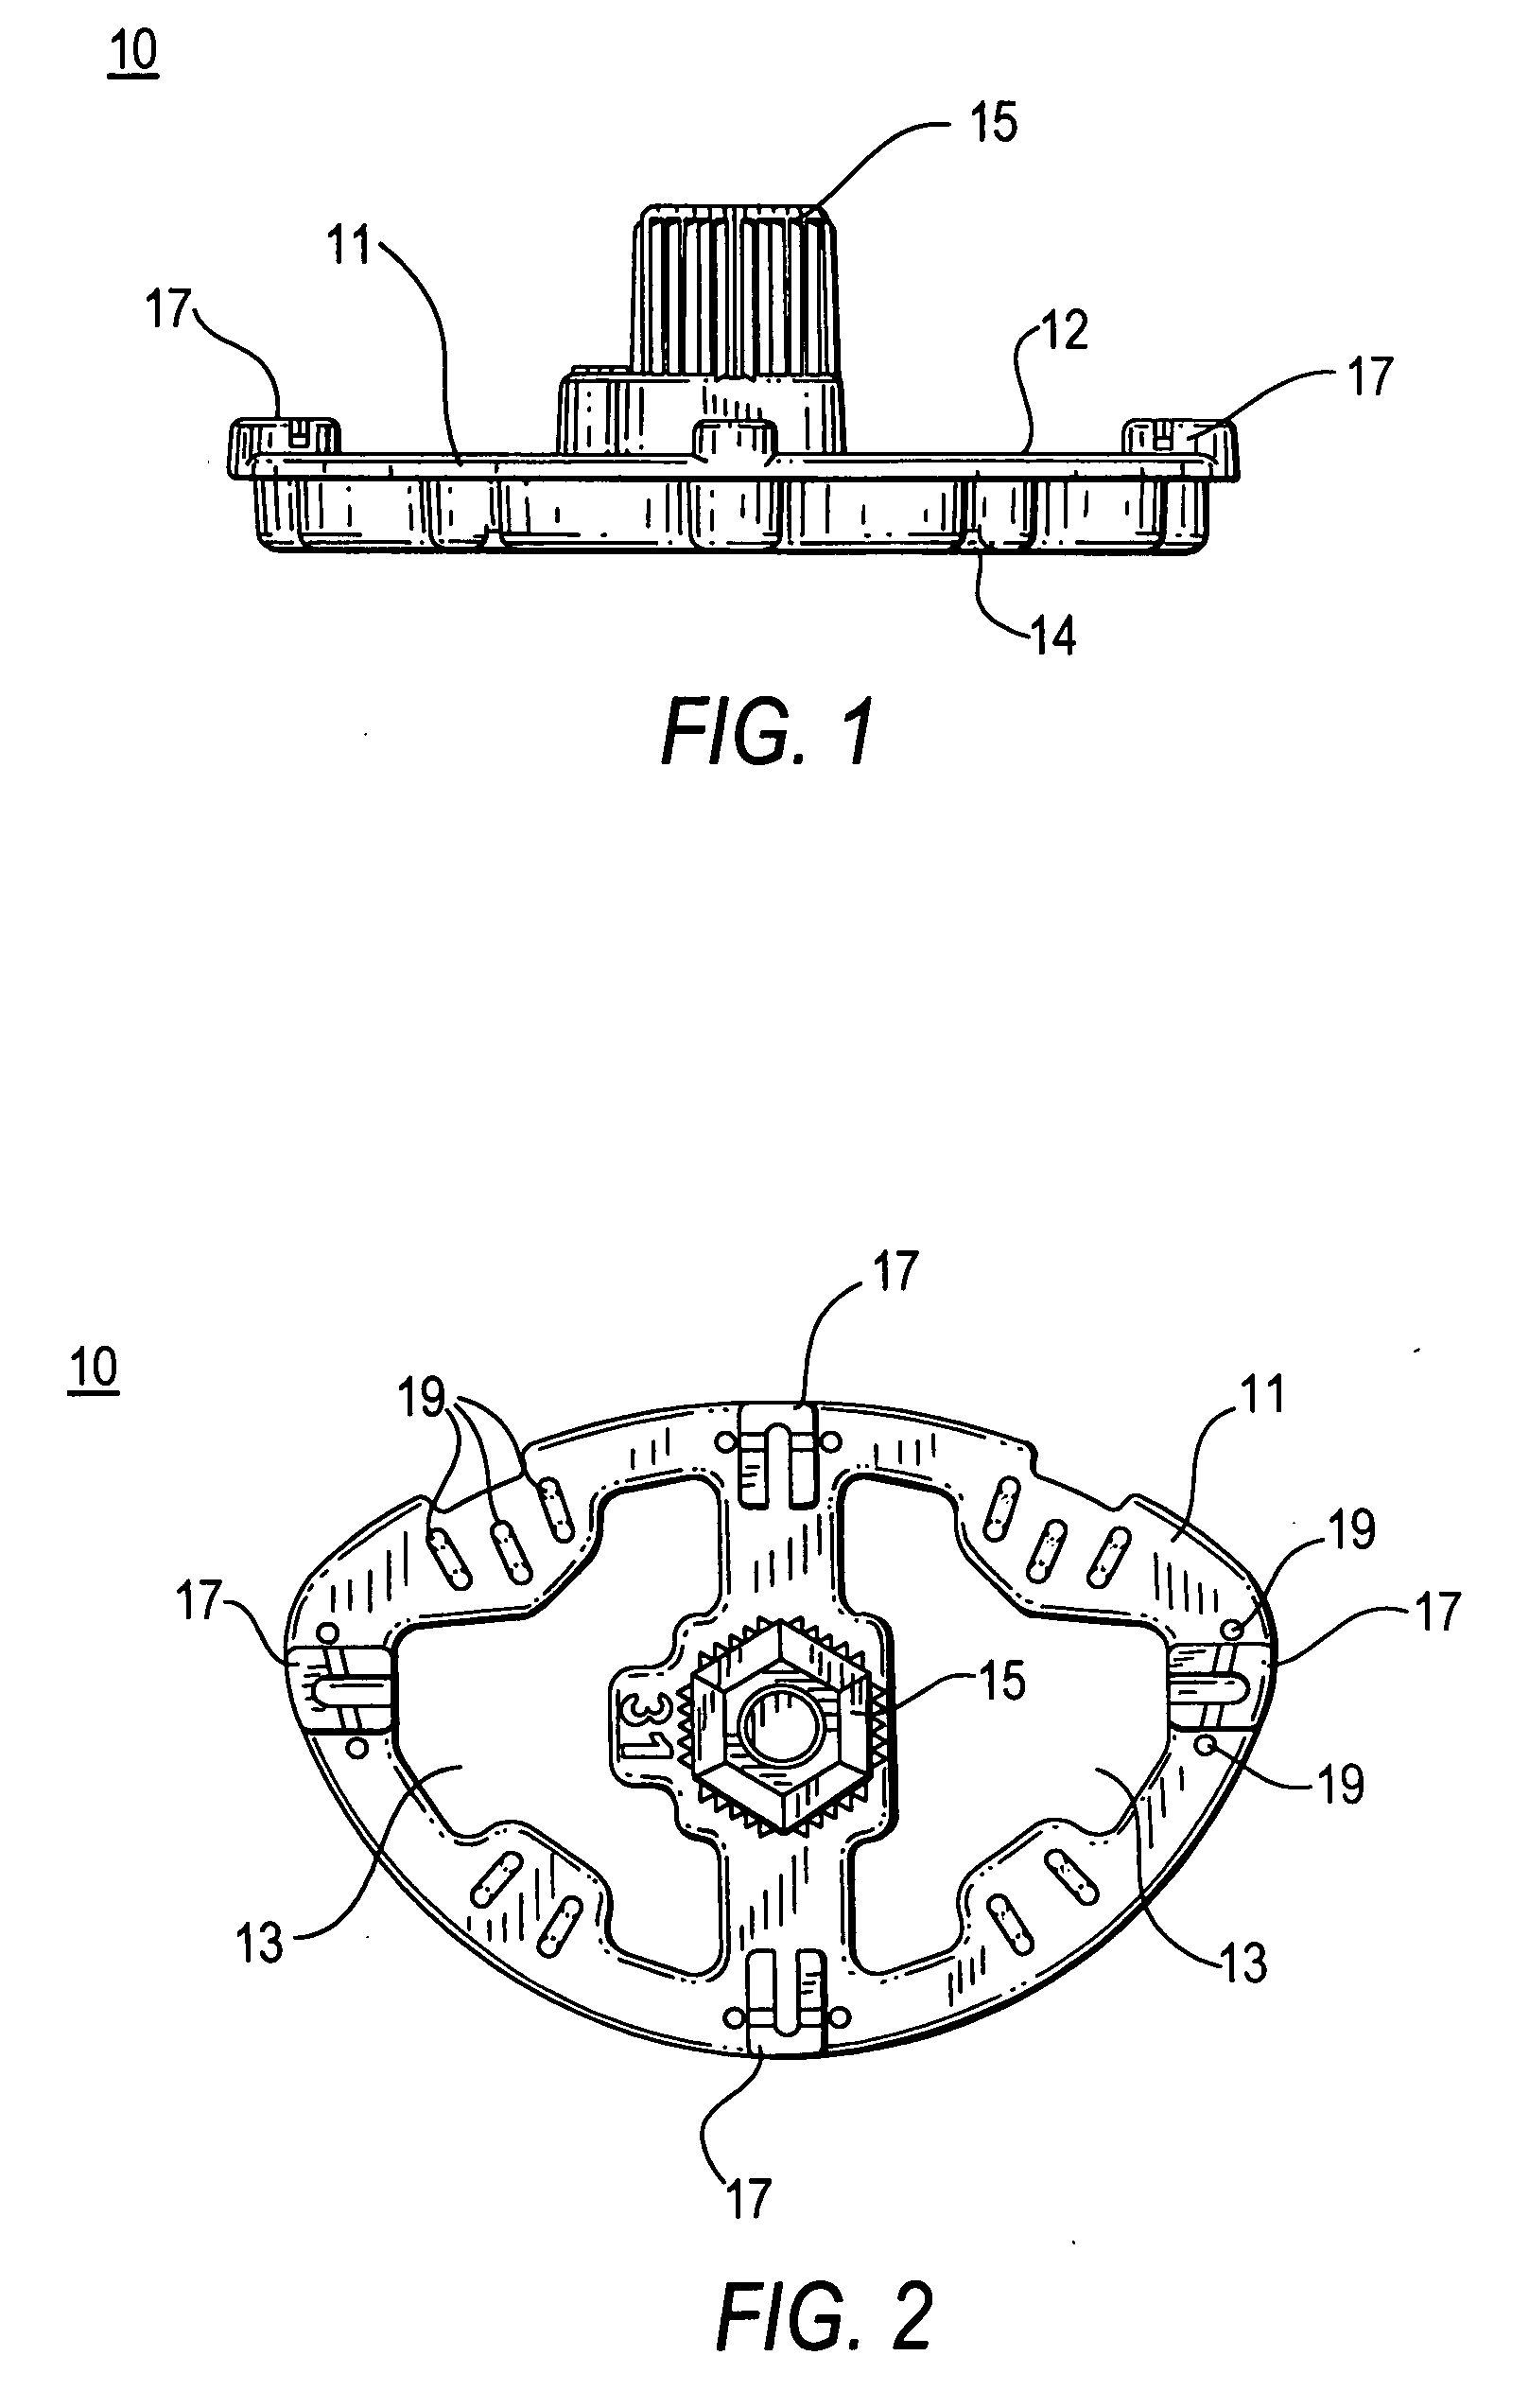 Systems and methods for holding annuloplasty rings